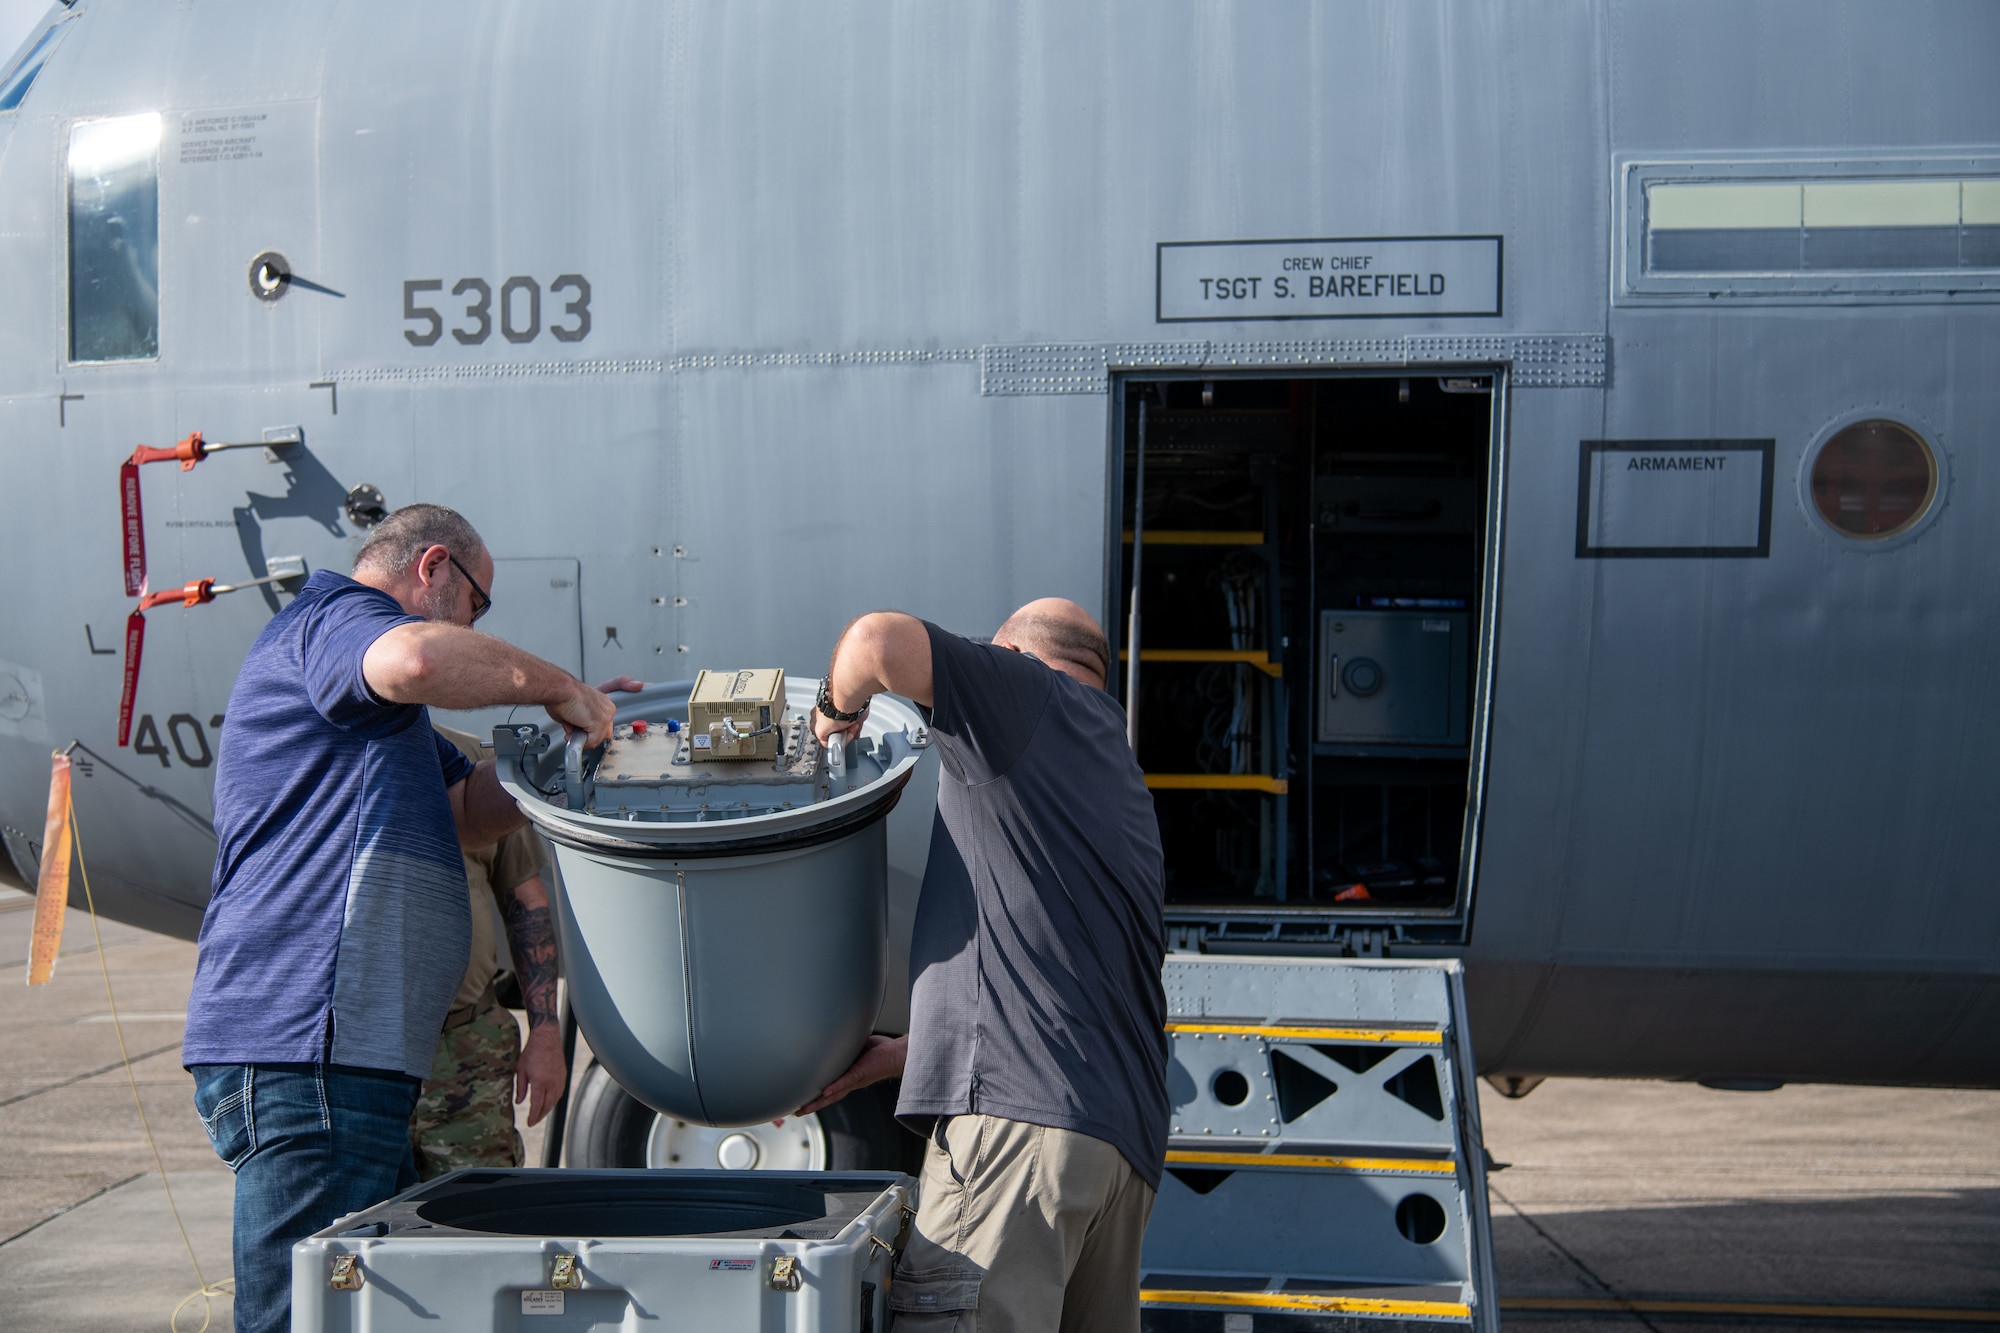 Engineers lift a satellite antenna from its storage bin to install it onto a WC-130J Super Hercules aircraft at Keesler Air Force Base, Miss., Oct. 12, 2021. The antenna is part of a satellite communications system designed to provide more efficient data transmission capabilities during 53rd Weather Reconnaissance Squadron missions into tropical disturbances.